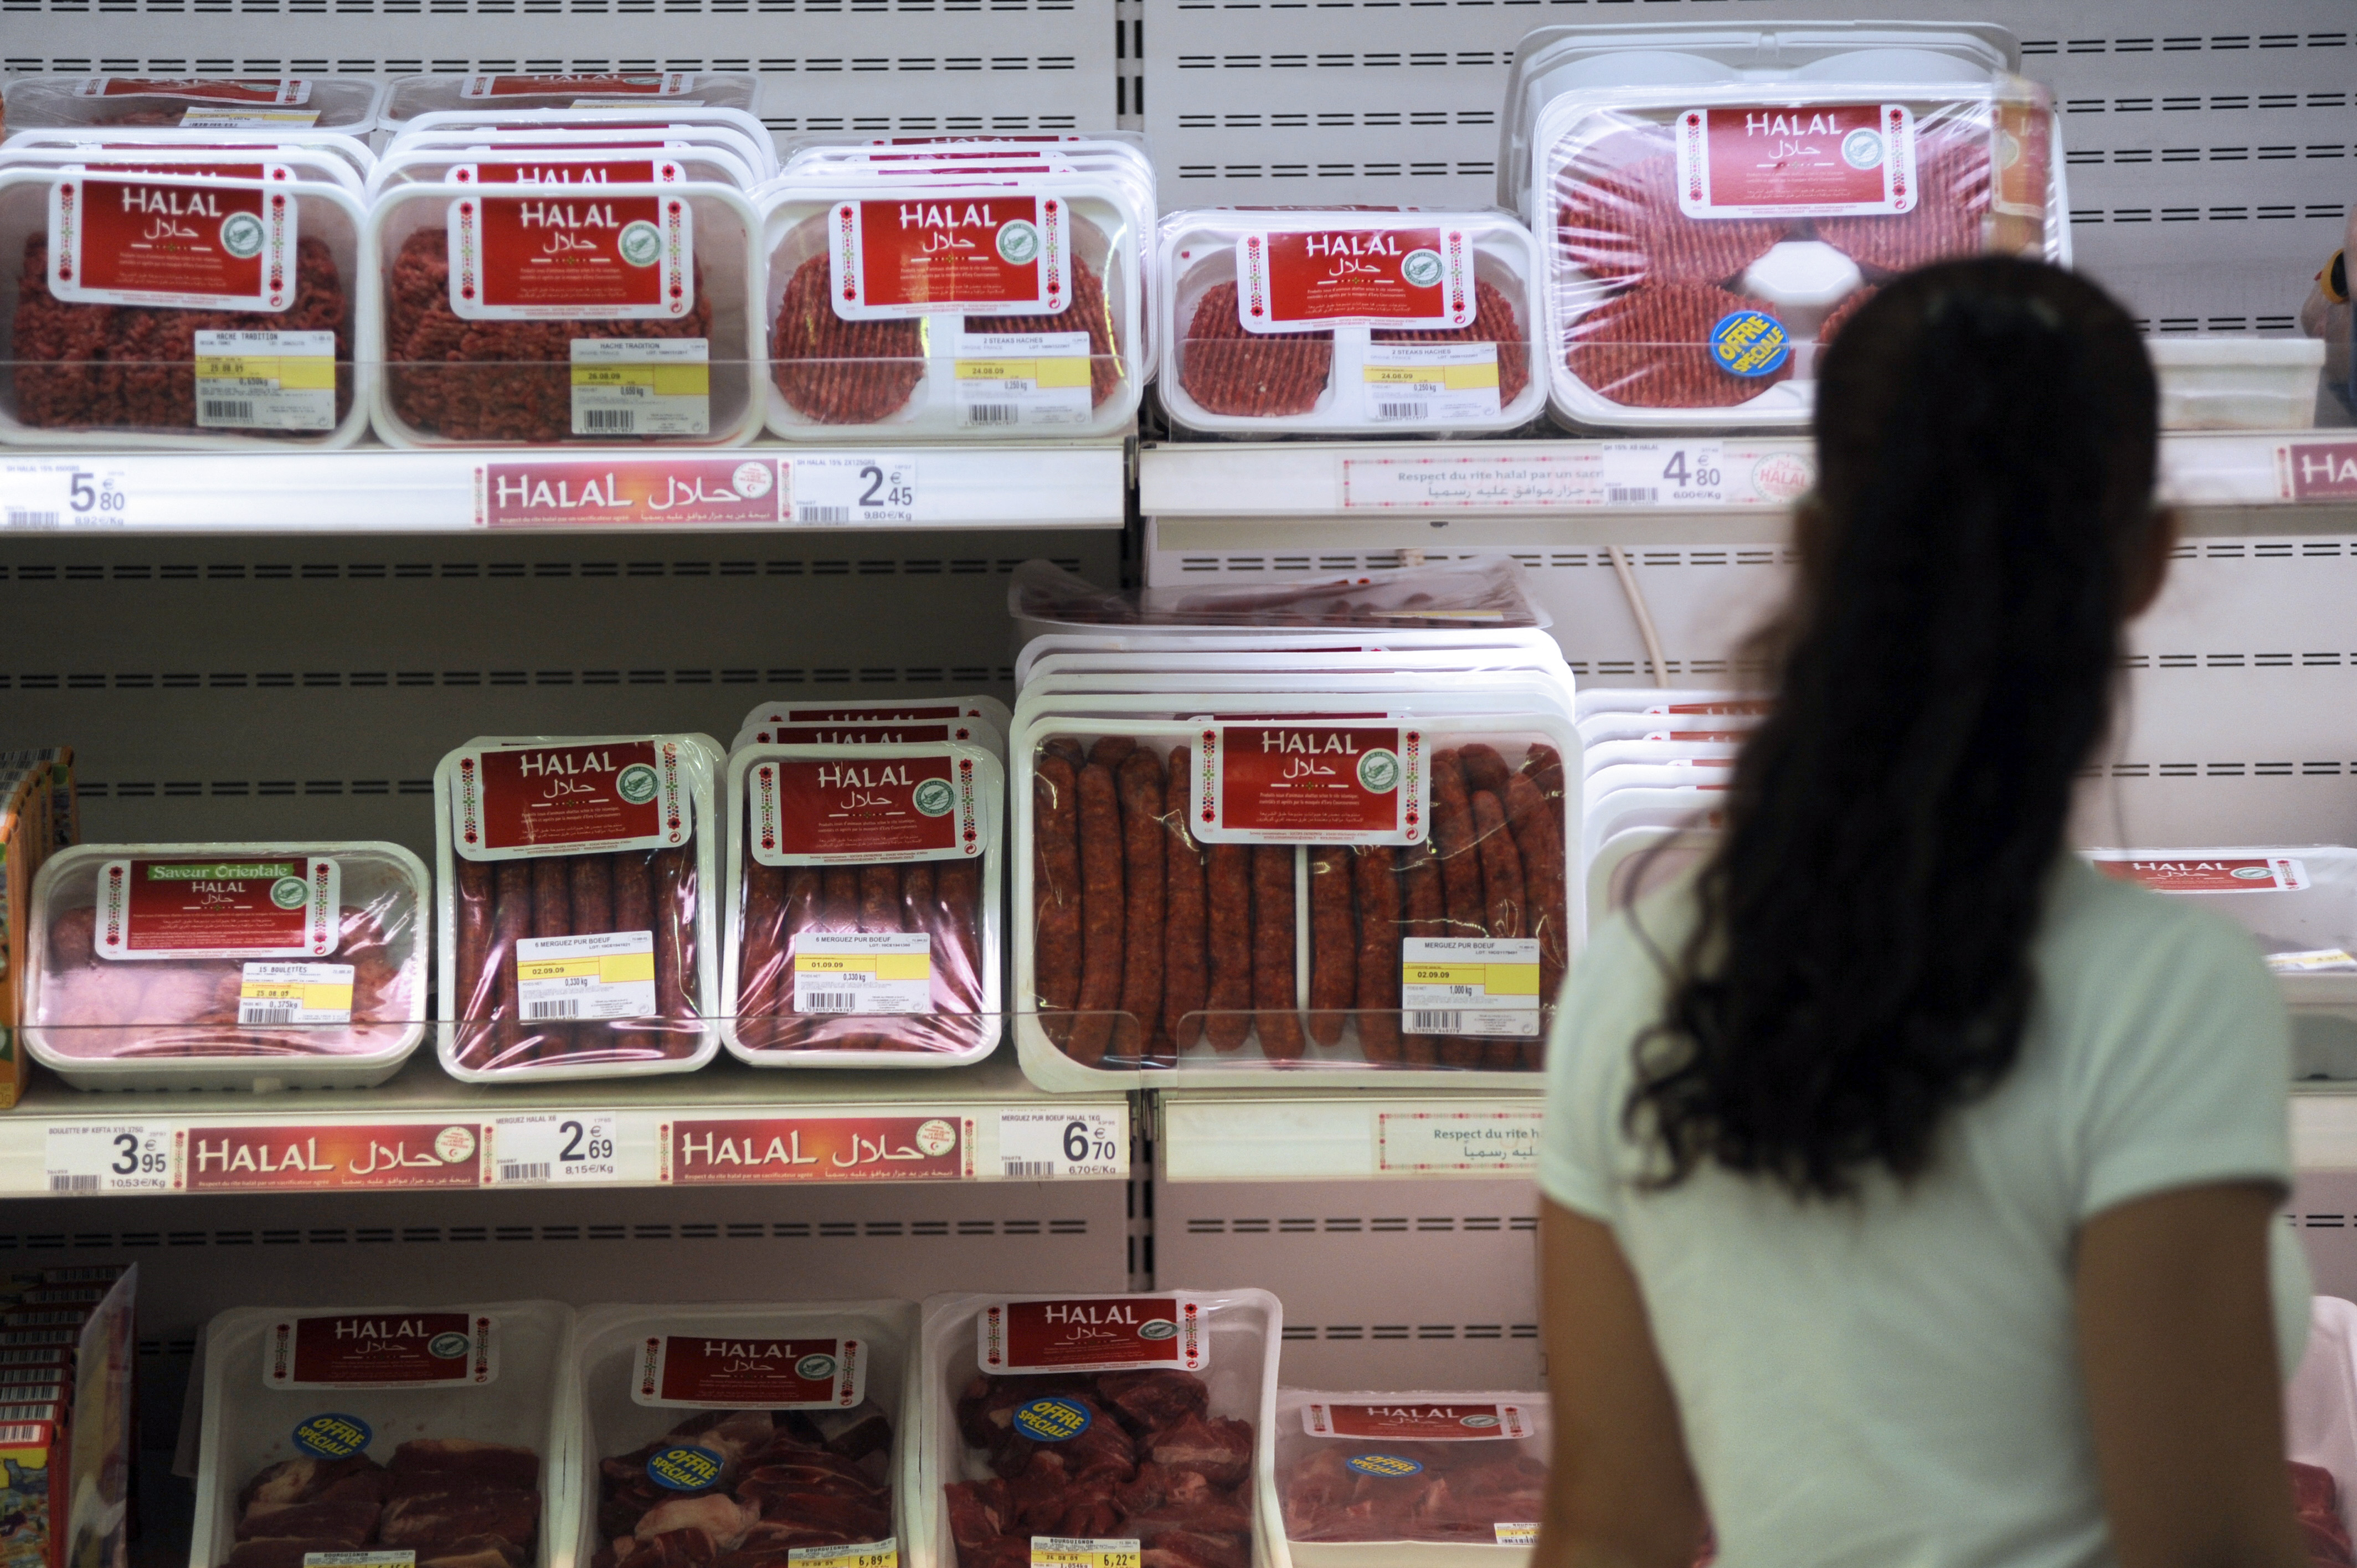 A customer passes by Halal butchery shelves in a supermarket in Illzach, eastern France, on Aug. 21, 2009.